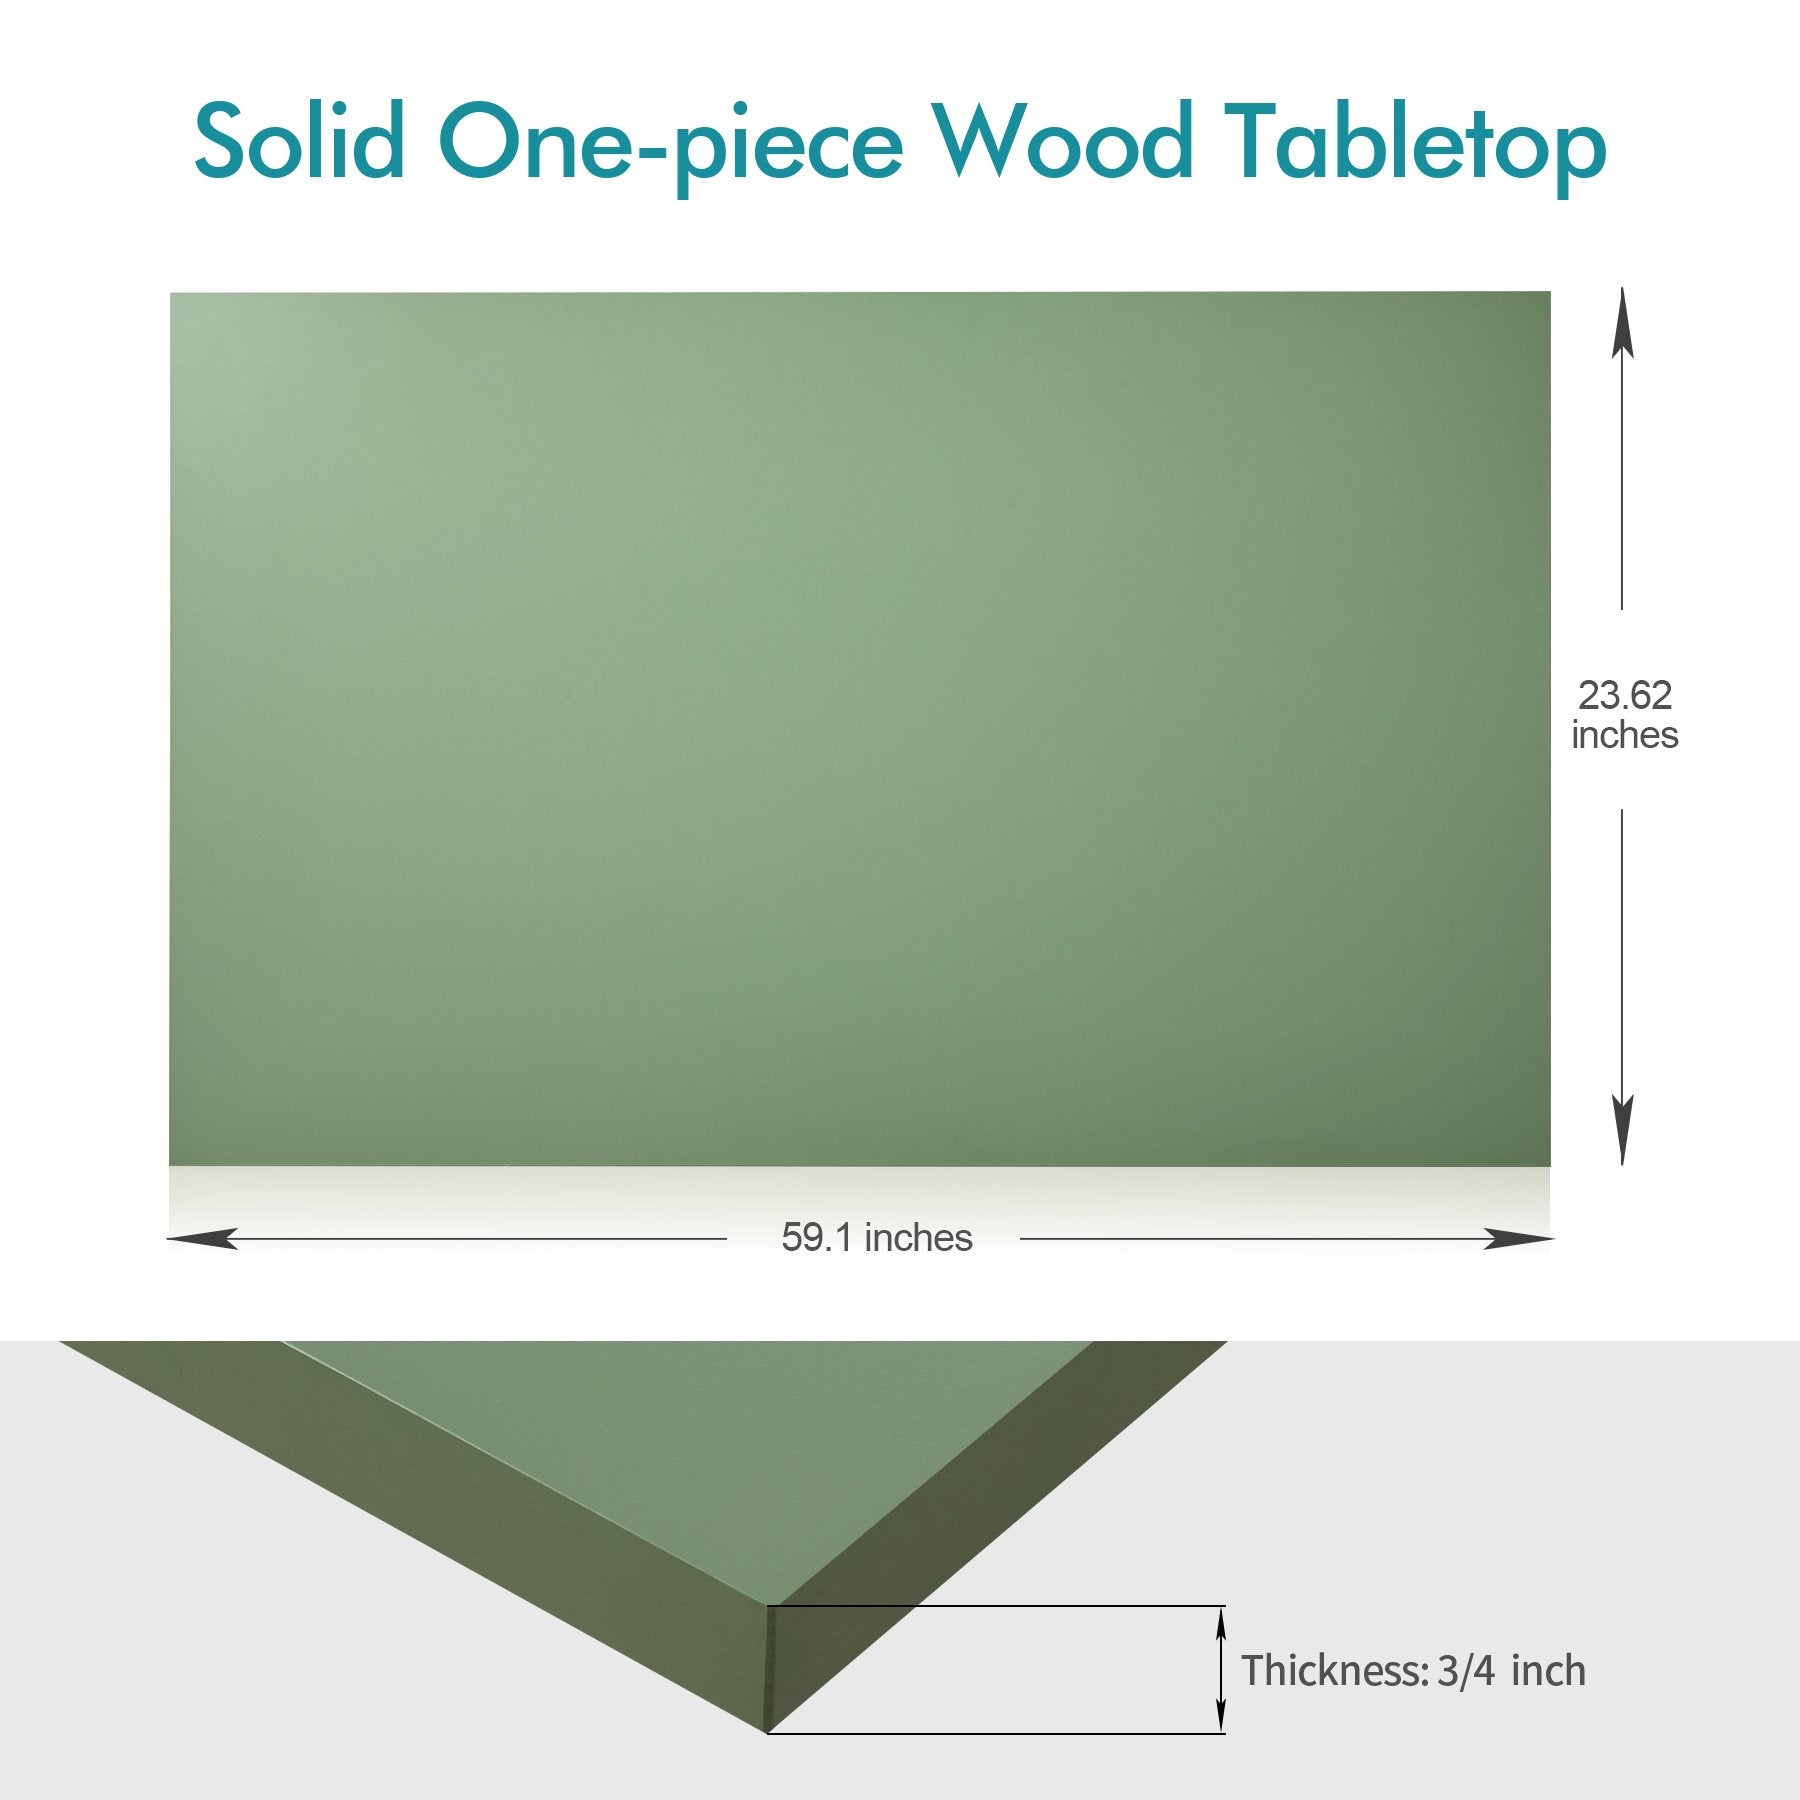 60x24 one-piece wood table top